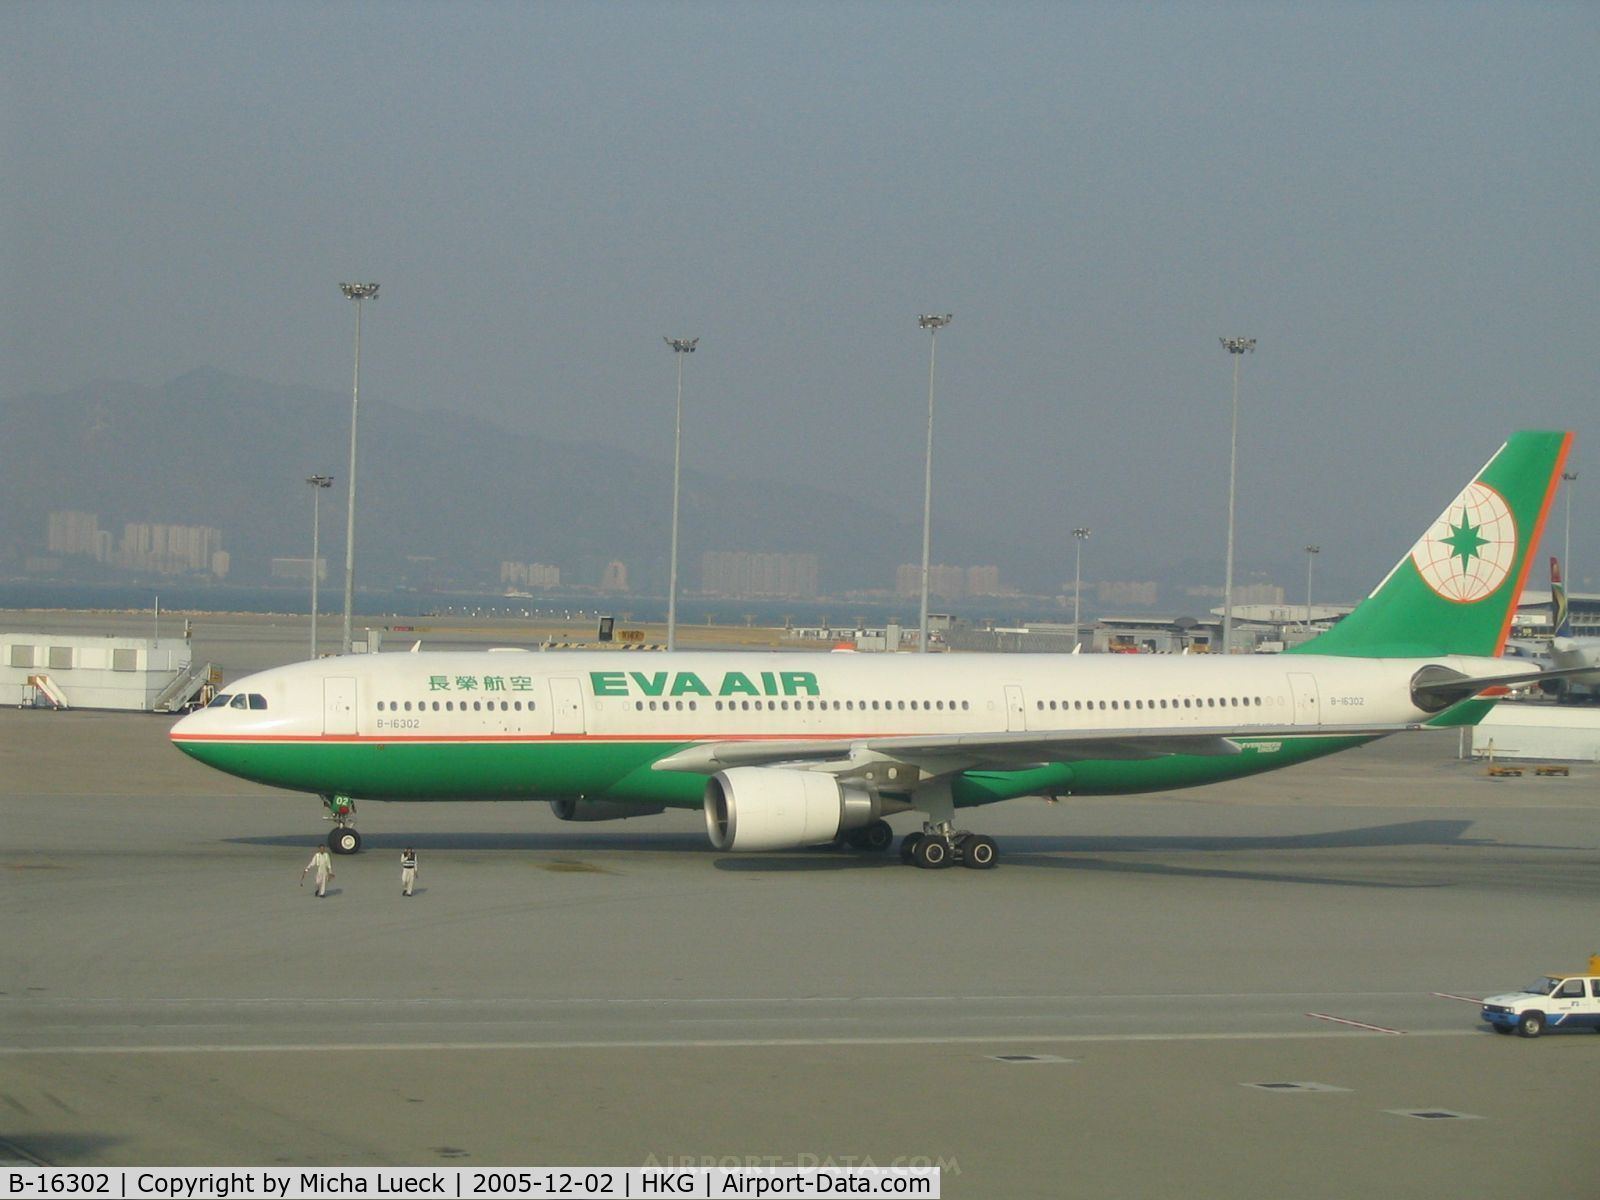 B-16302, 2003 Airbus A330-203 C/N 535, Ready for the flight back to Taiwan